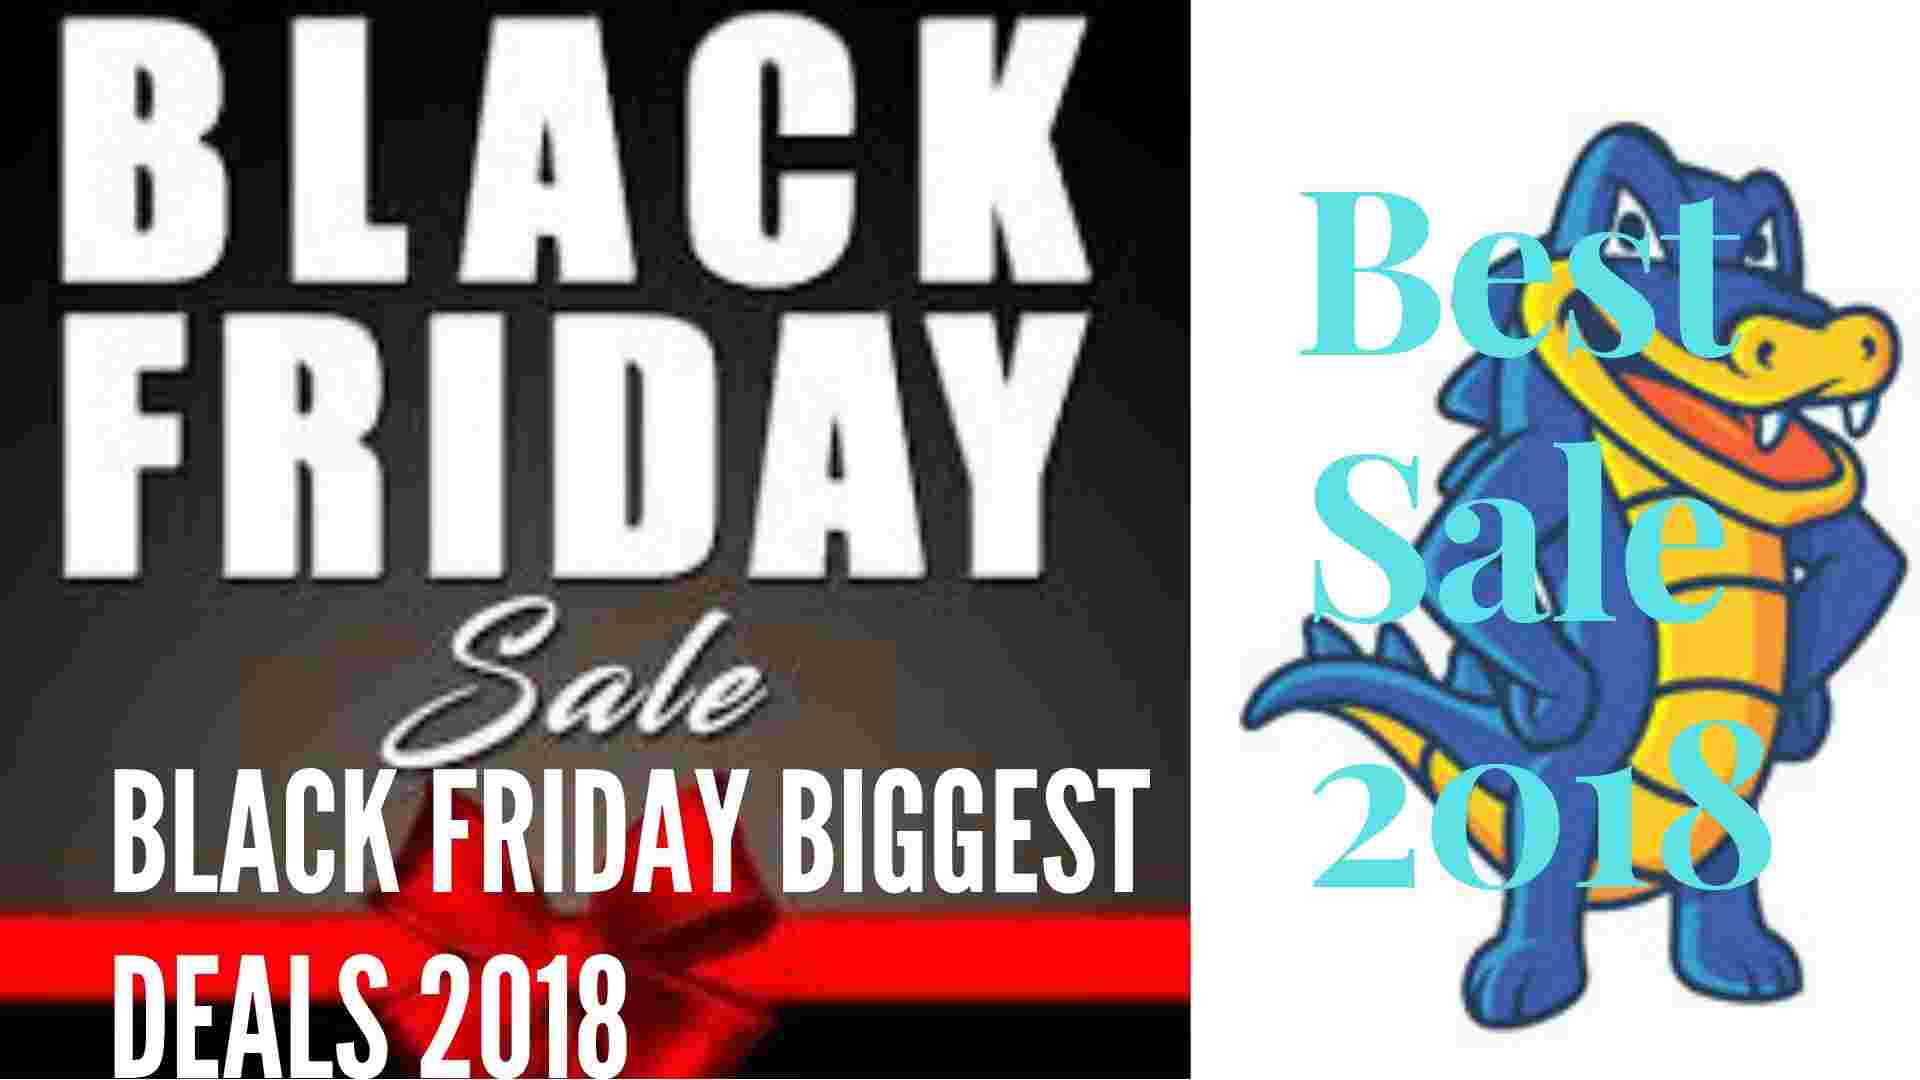 Black Friday Sale 2018 Offers & deals